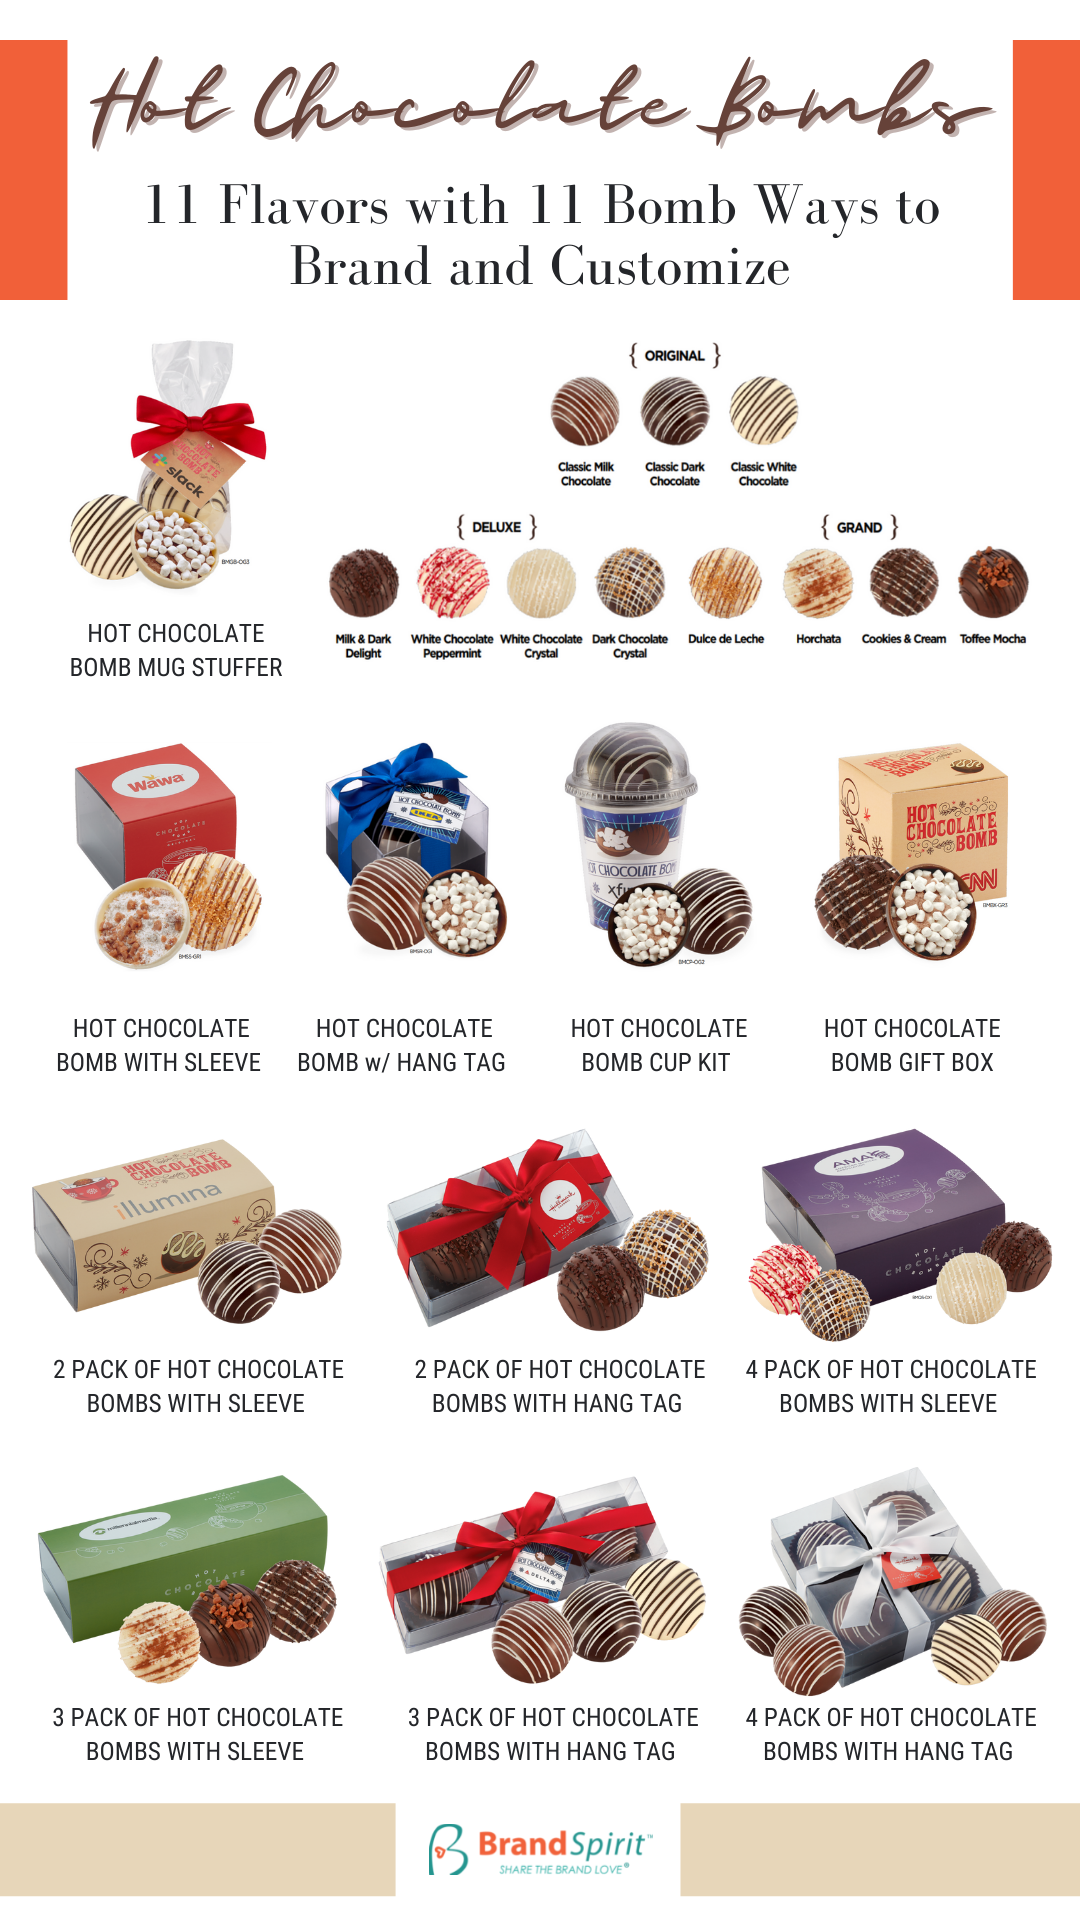 This selection of Belgian hot chocolate bombs is perfect for event giveaways or office treats. Choose from 11 delectable flavors from Classic Milk Chocolate to Dulce de Leche! Customize with a logo.